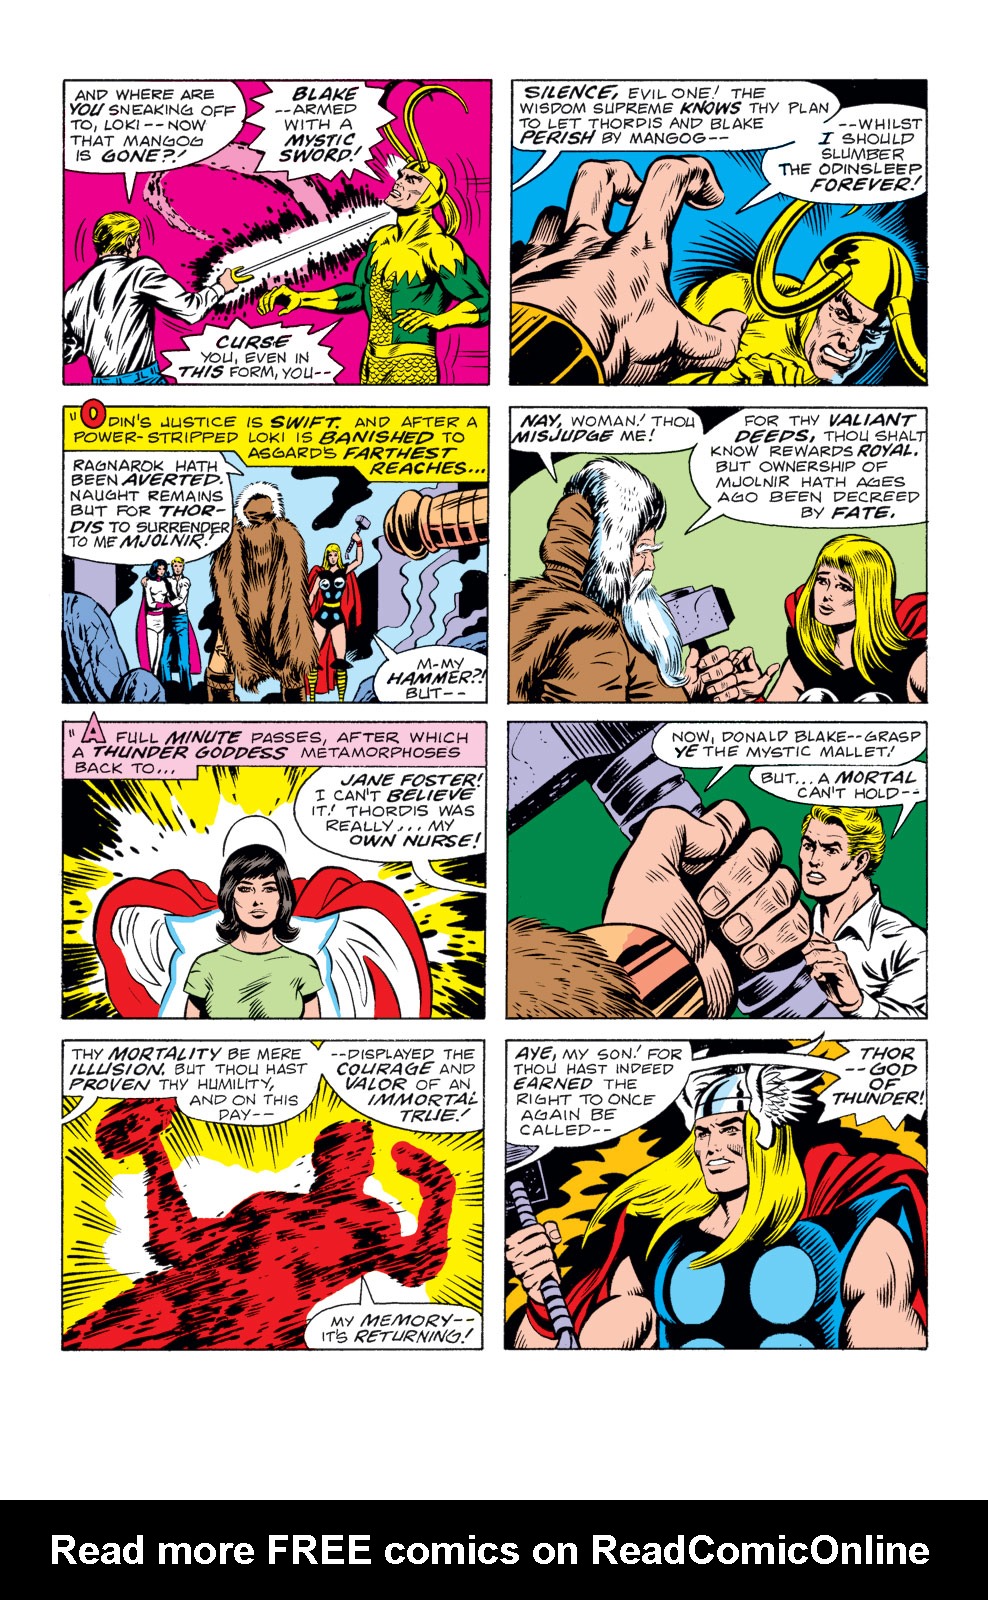 What If? (1977) issue 10 - Jane Foster had found the hammer of Thor - Page 32